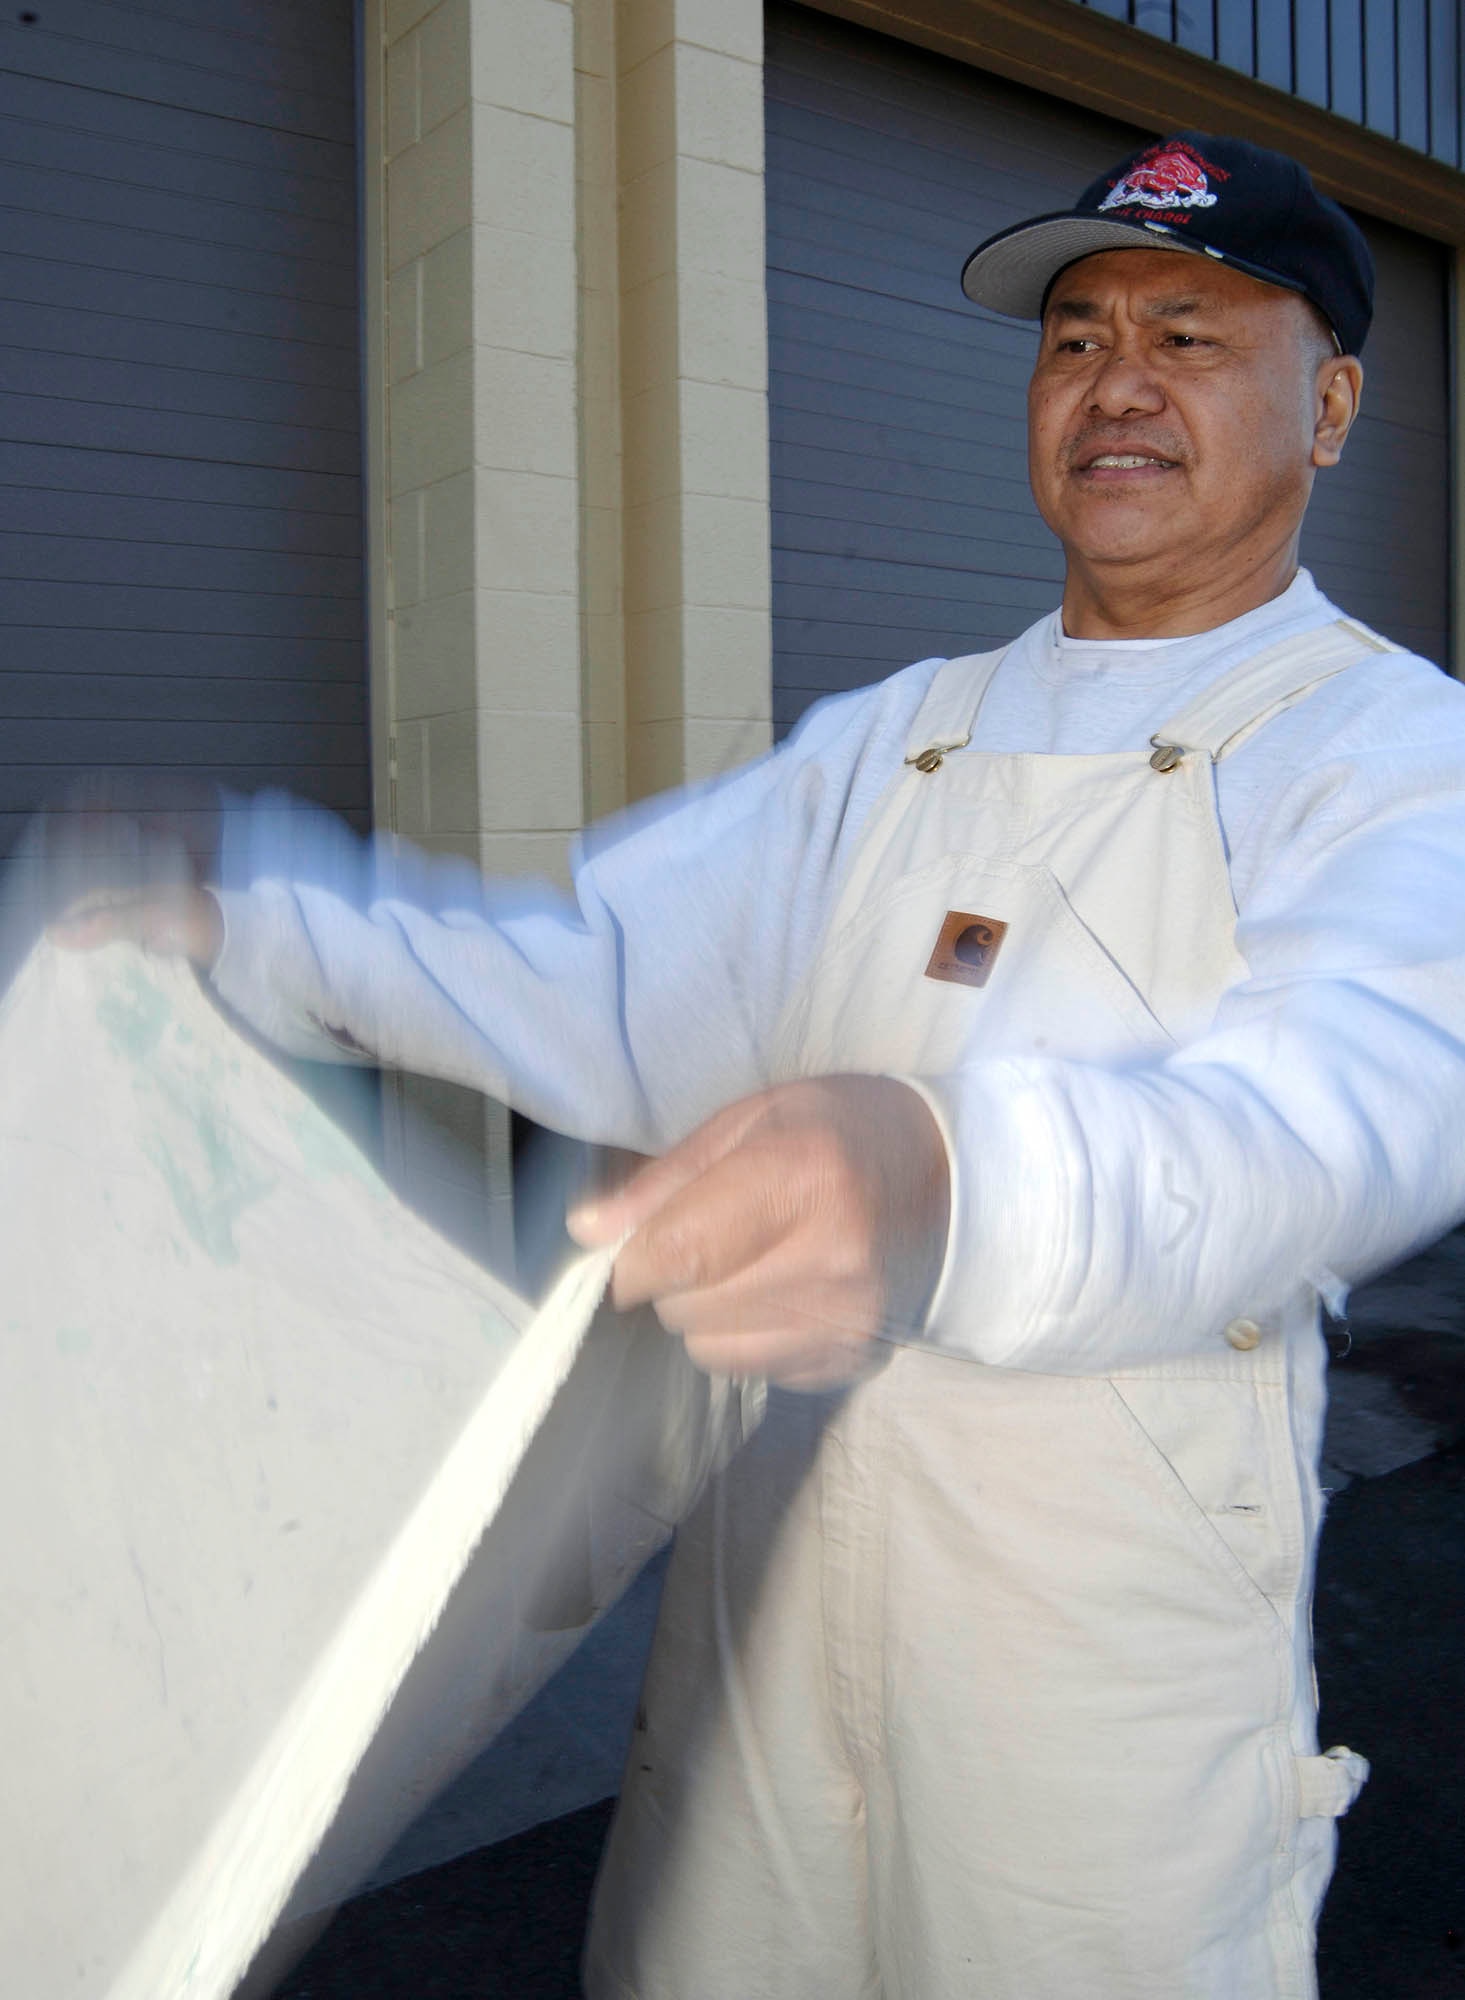 FAIRCHILD AIR FORCE BASE, Wash. – Chito Nacion, 92nd Civil Engineer Squadron painter, applies a drop cloth around the auto hobby shop March 18. The drop cloth ensures paint splatter and spills are kept to a minimum. (U.S. Air Force photo/Staff Sgt. JT May III)